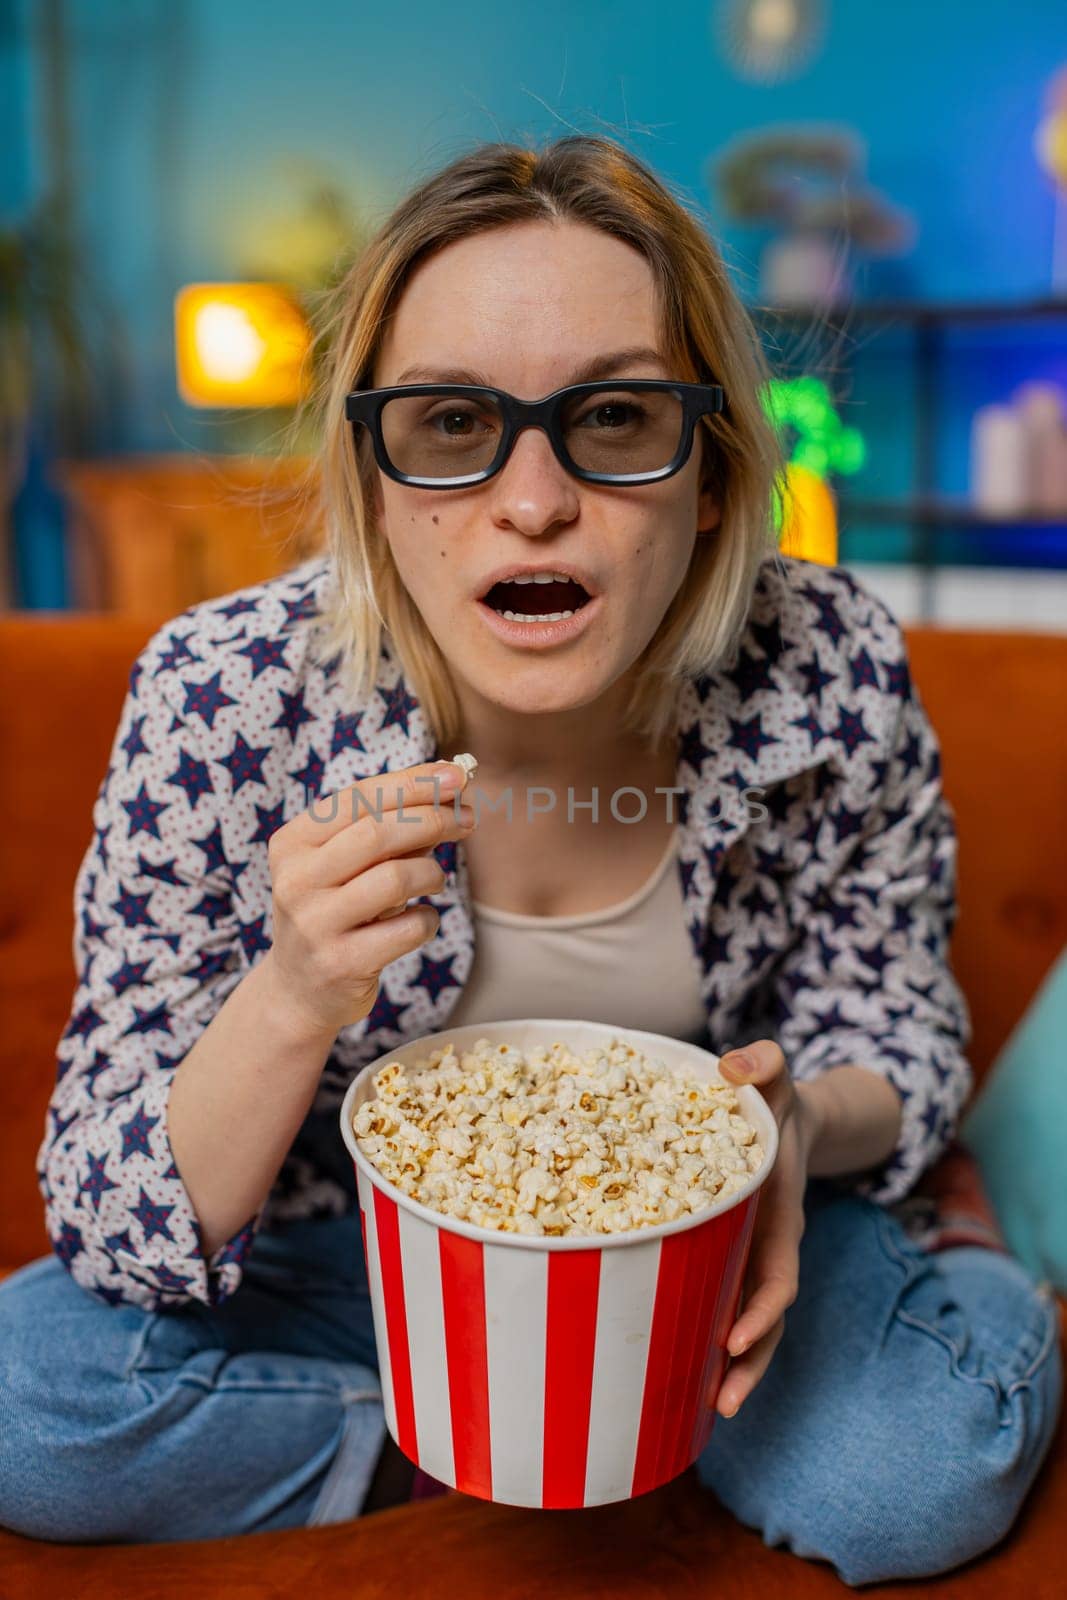 Excited woman sitting on couch eating popcorn watching interesting TV serial, sport game, film, online social media movie content at home. Girl in 3D glasses enjoying domestic entertainment. Vertical